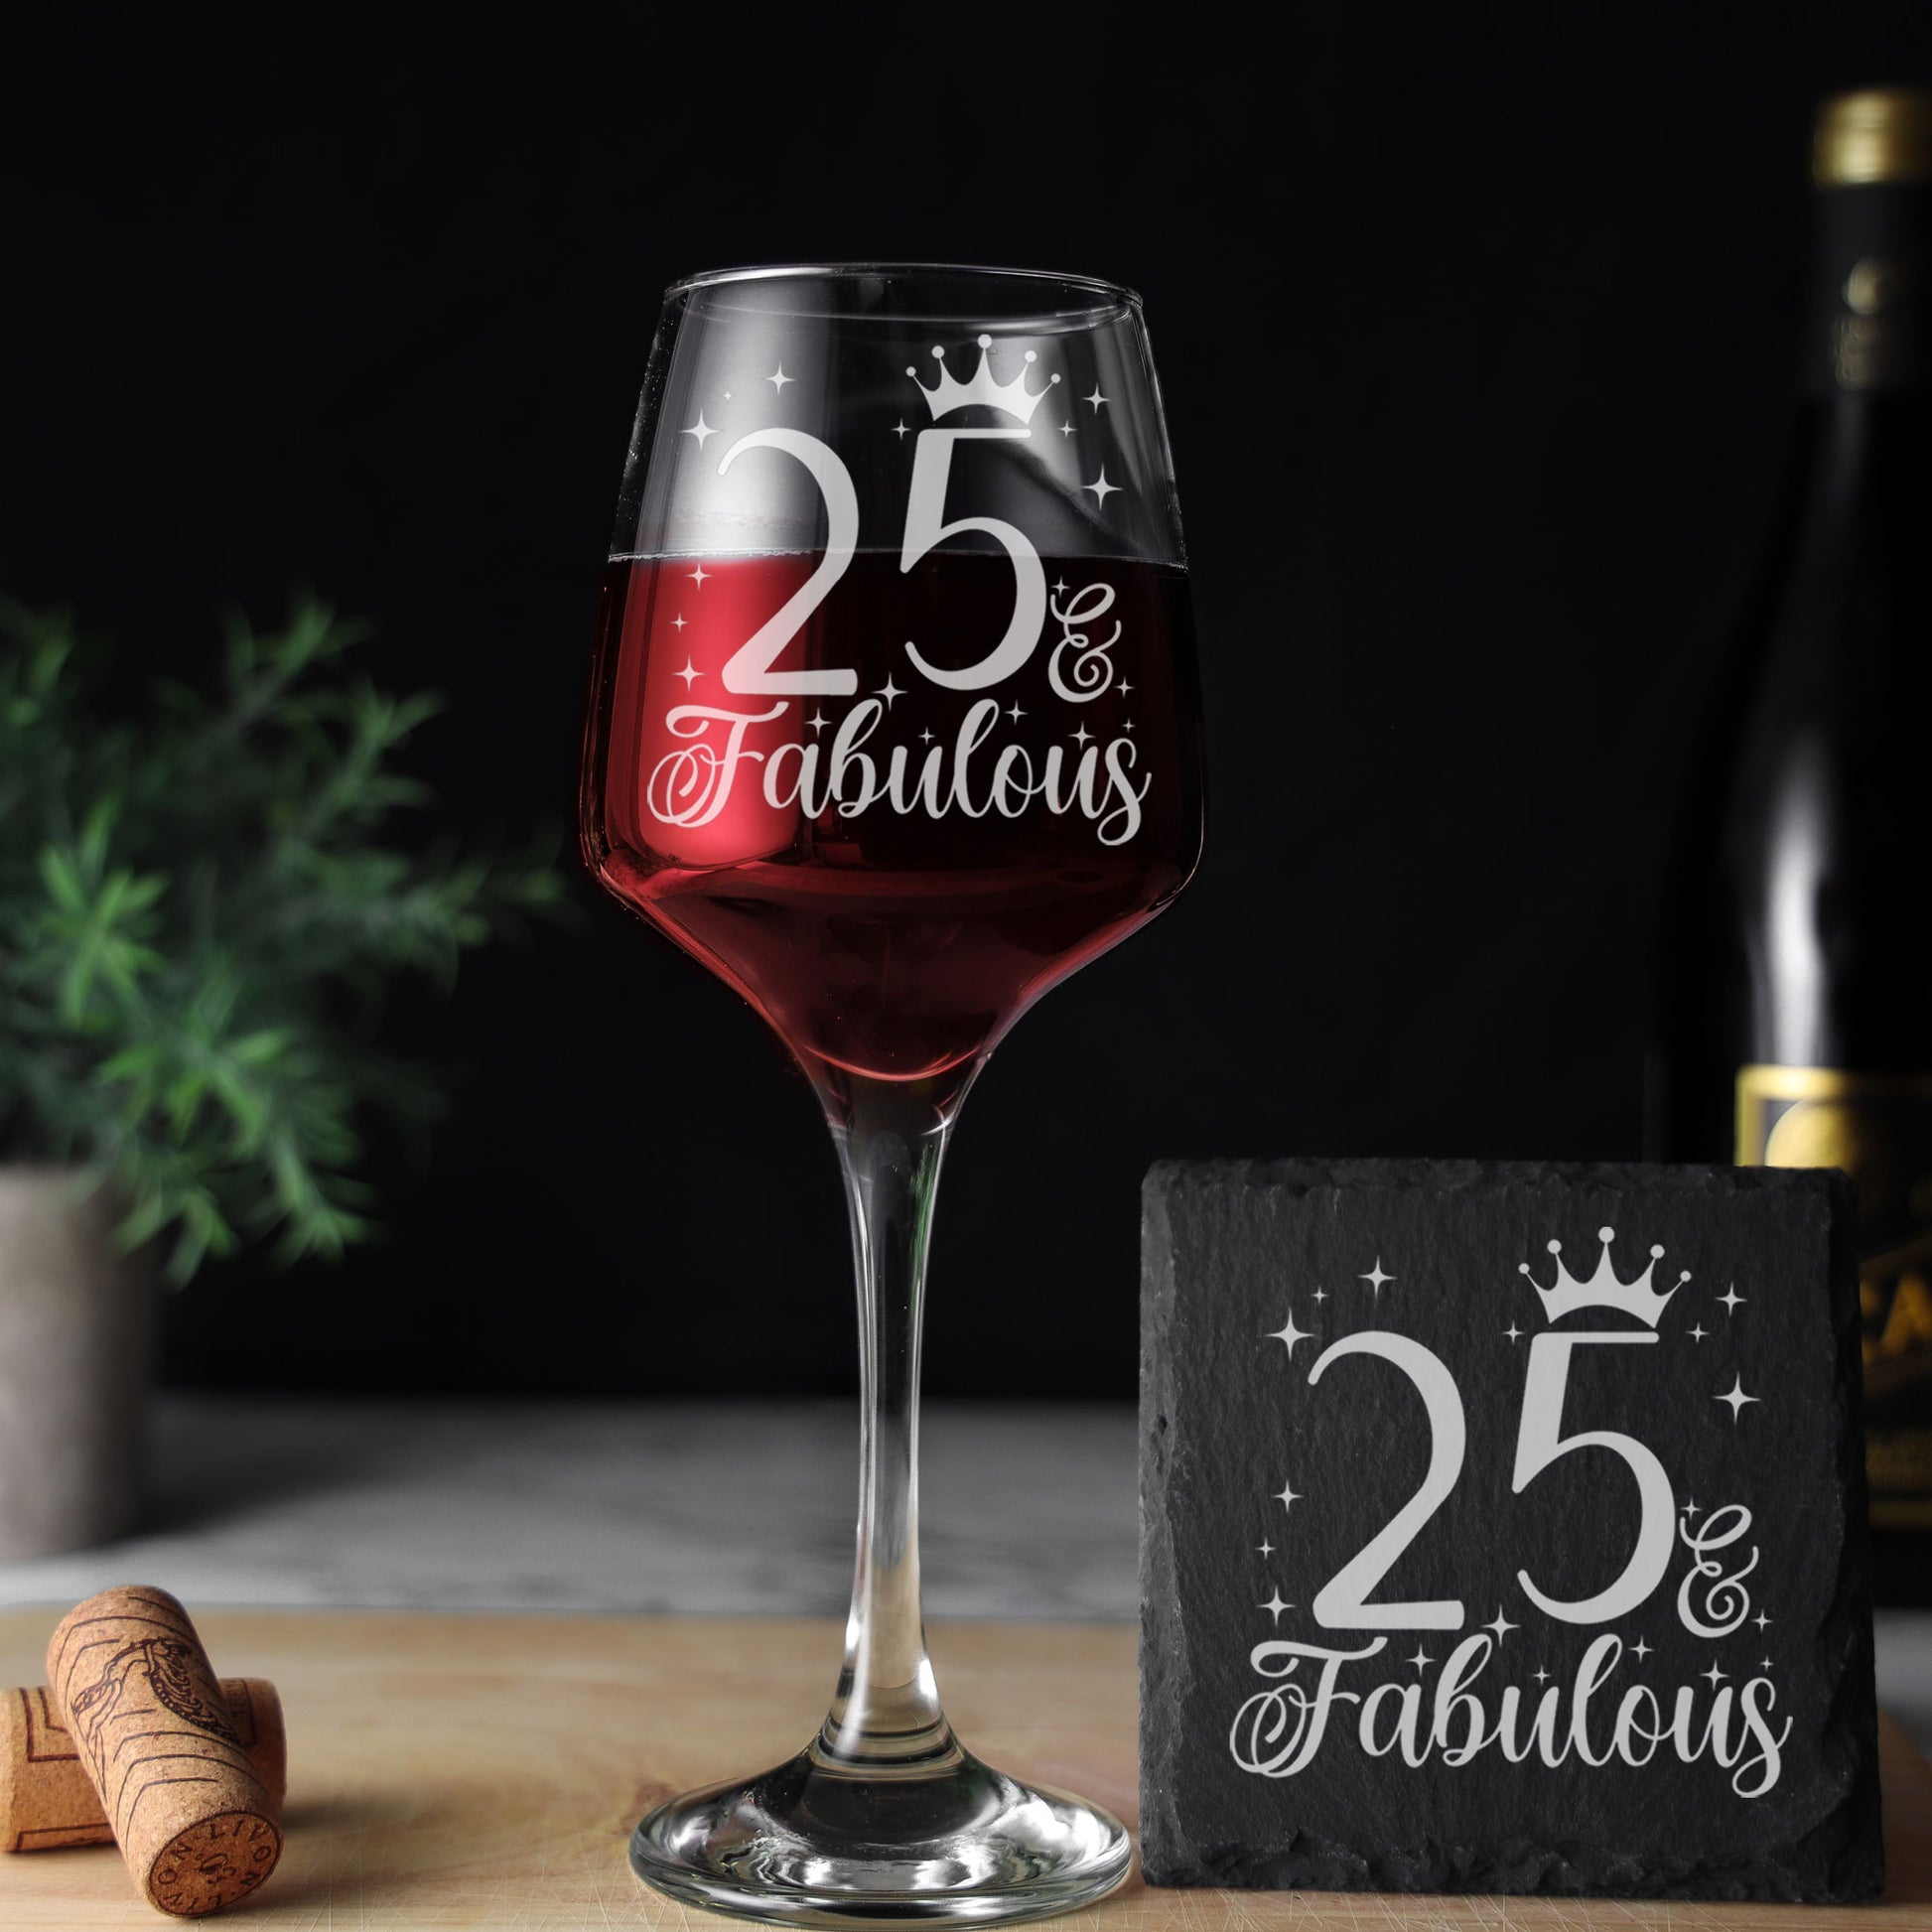 25 & Fabulous 25th Birthday Gift Engraved Wine Glass and/or Coaster Set  - Always Looking Good - Glass & Square Coaster  